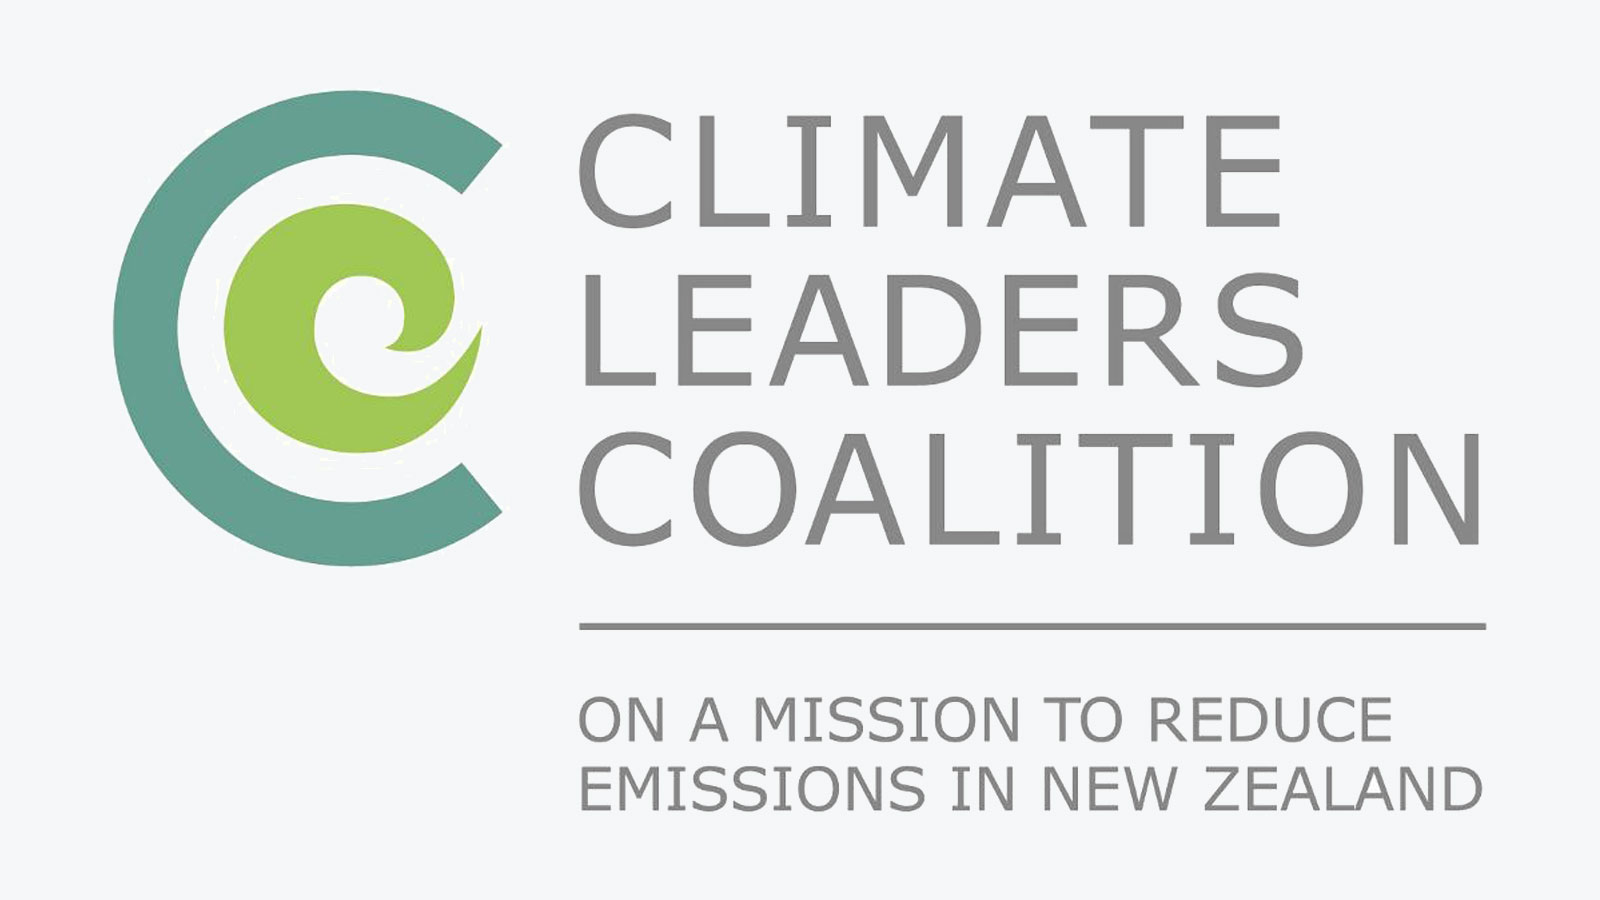 Climate Leaders Coalition